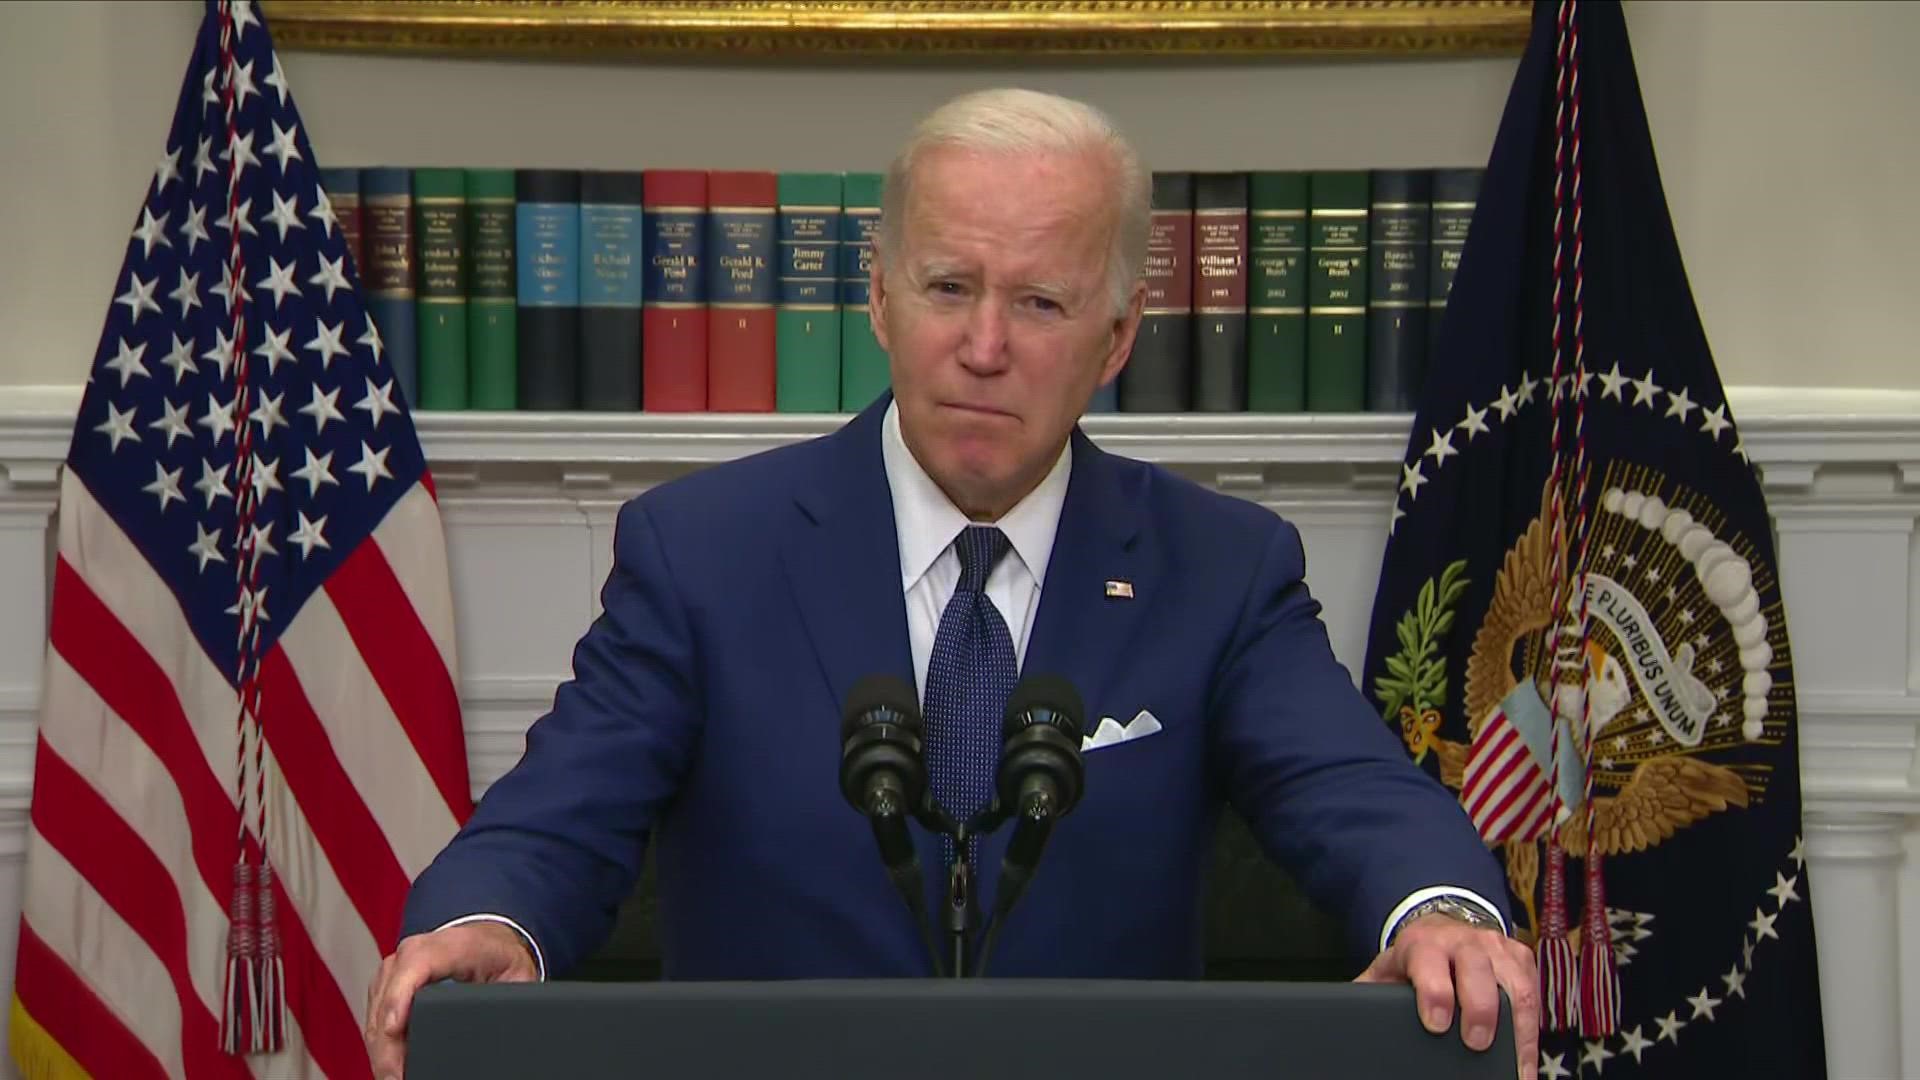 President Joe Biden delivered an emotional call for new restrictions on firearms after a gunman opened fire at a Texas elementary school on Tuesday.